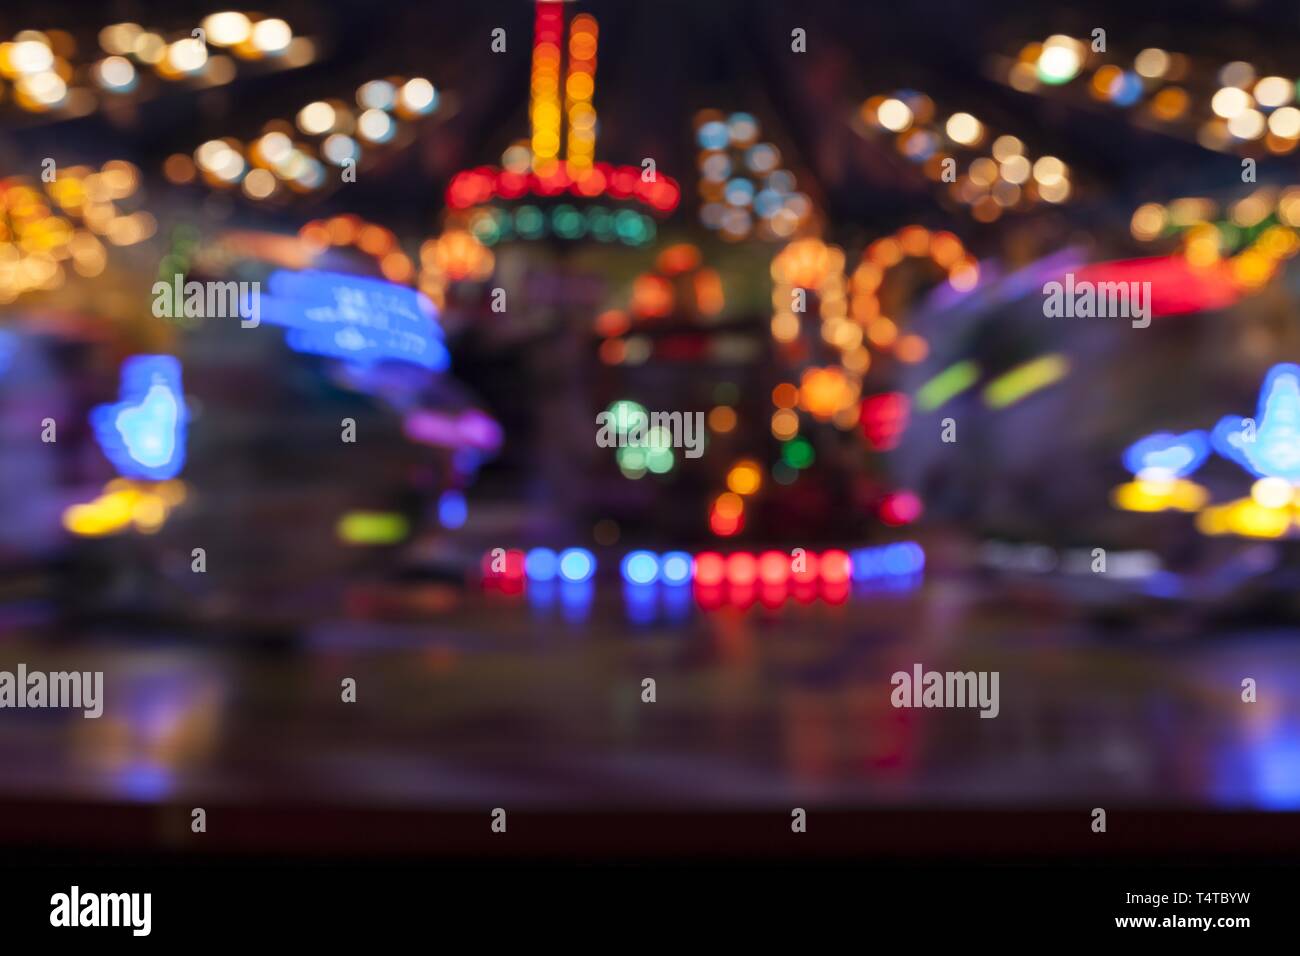 Fairground at night, blurred vision, Germany, Europe Stock Photo